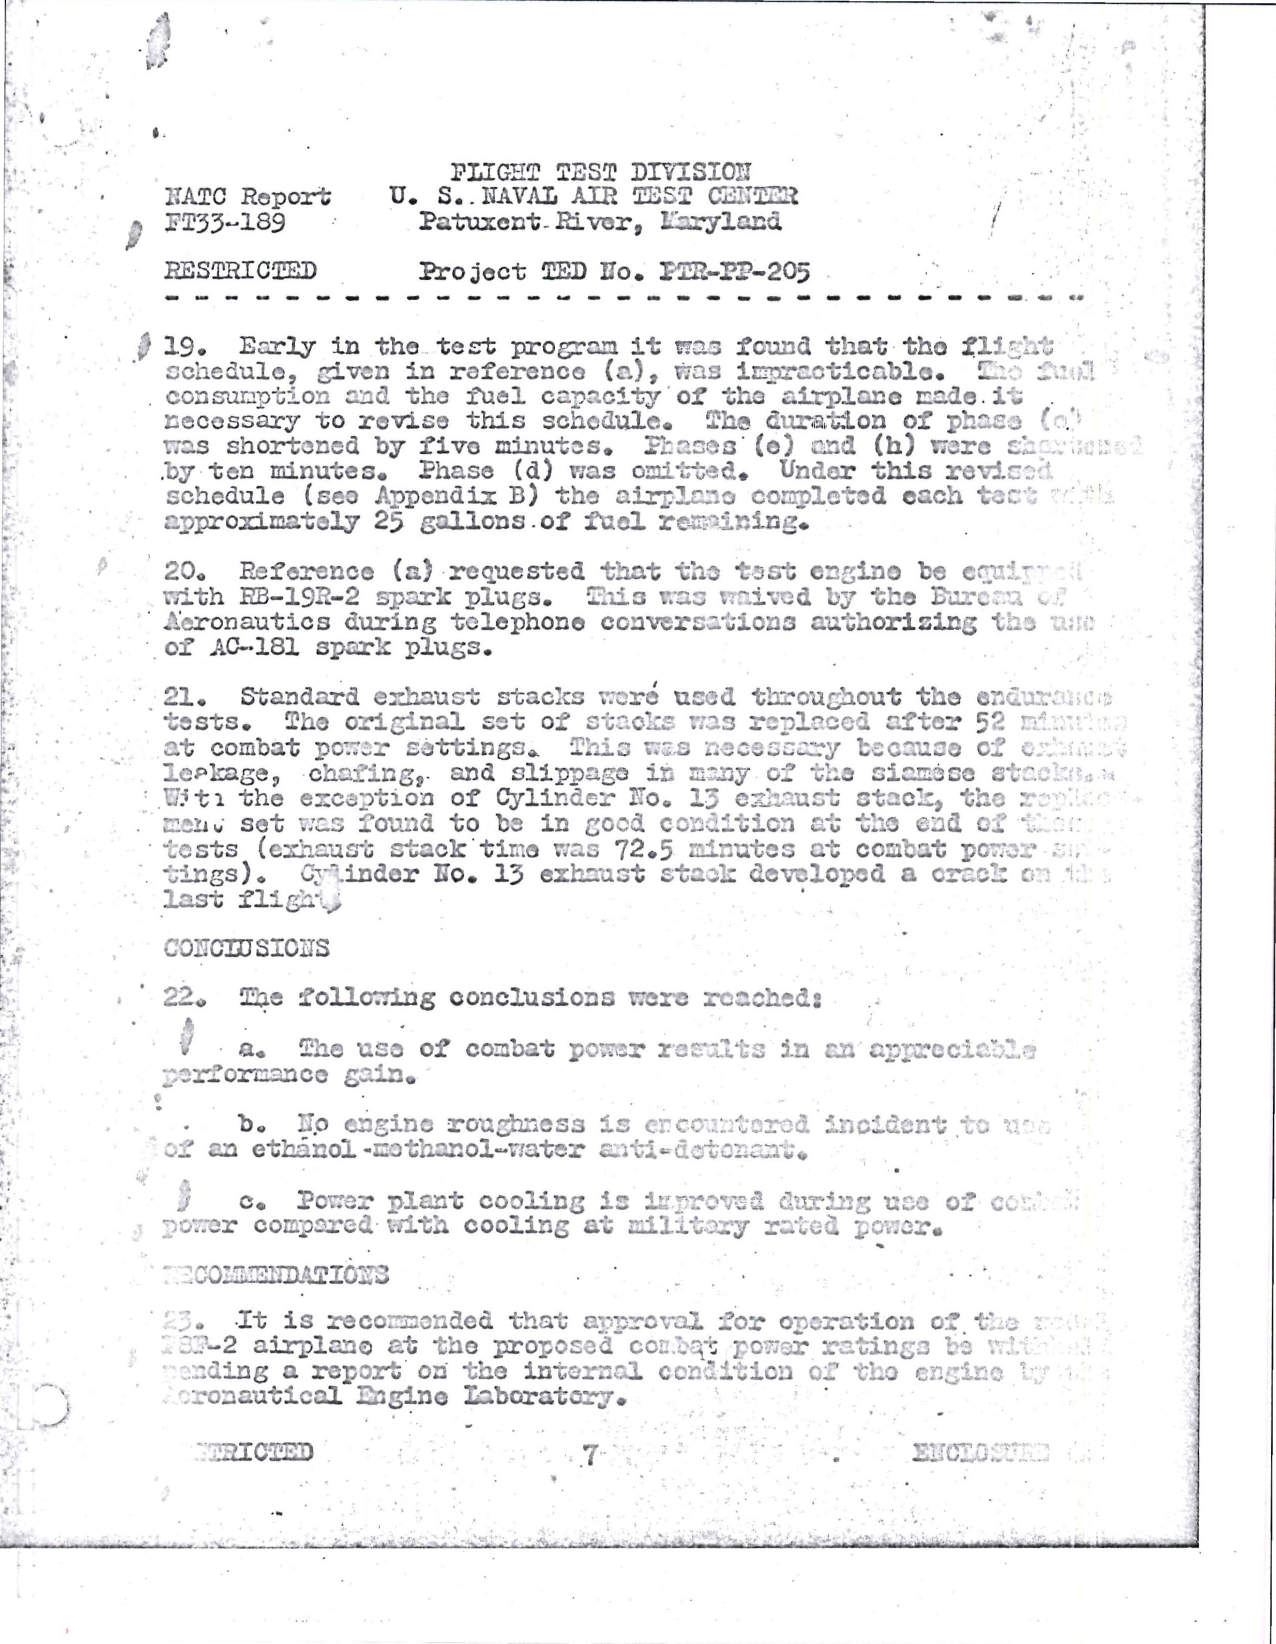 Sample page 9 from AirCorps Library document: Final Report on Combat Power Evaluation on F8F-2